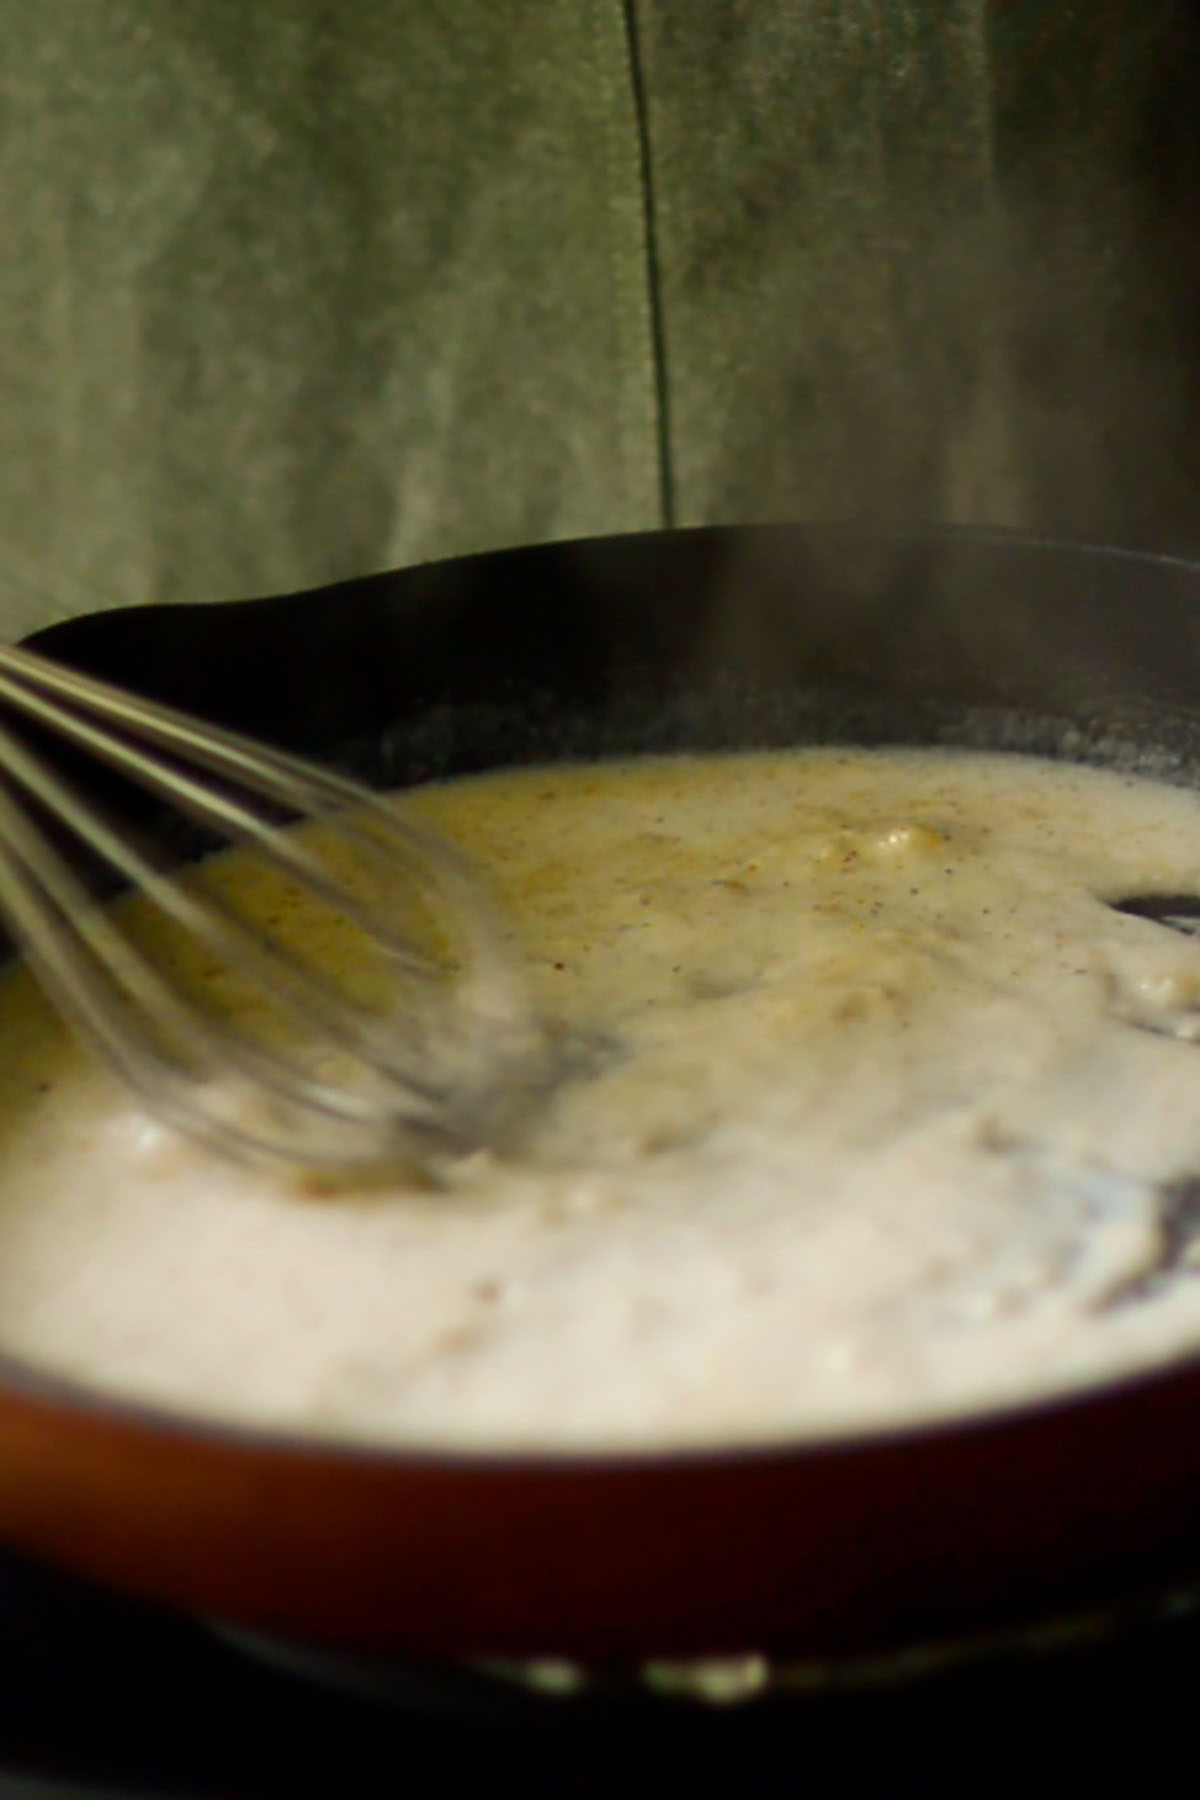 Mornay sauce base being whisked in a small cast iron skillet.